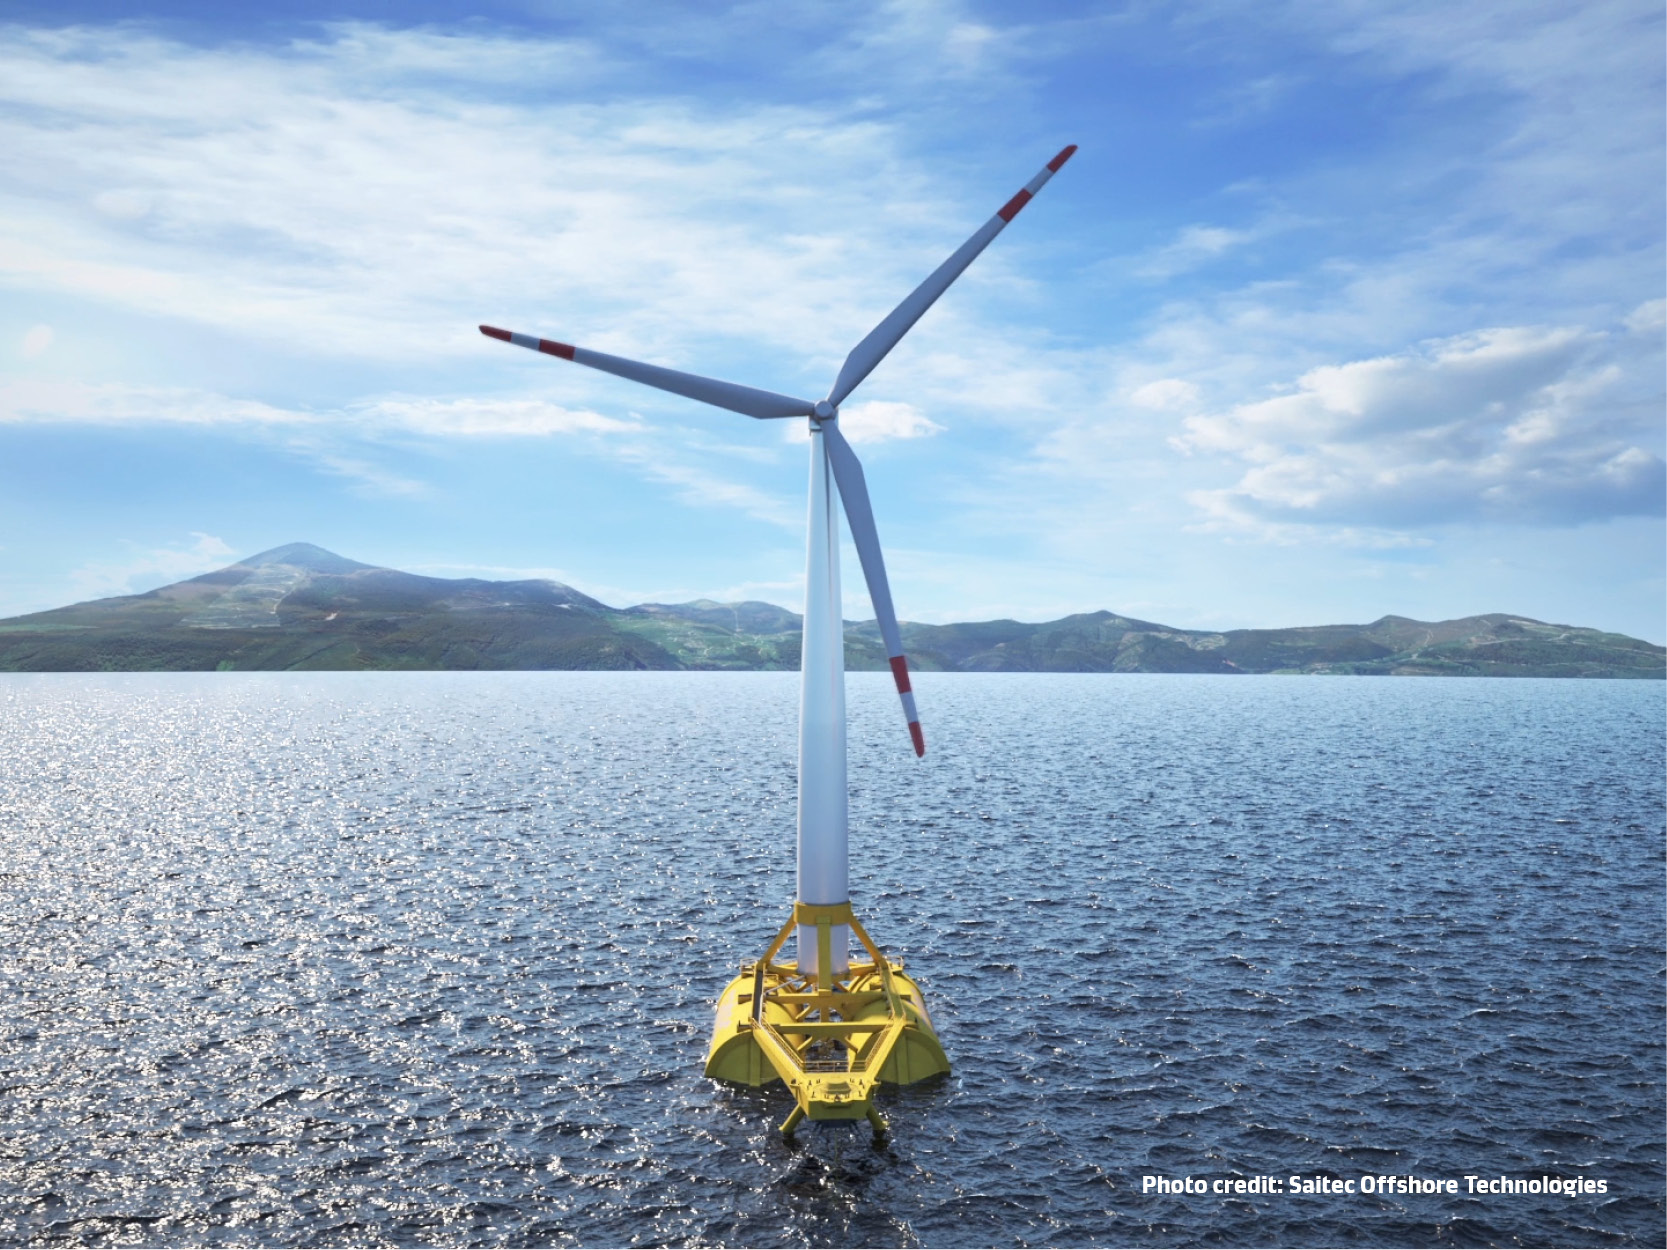 Maersk Supply Service wins Saitec floating wind contract